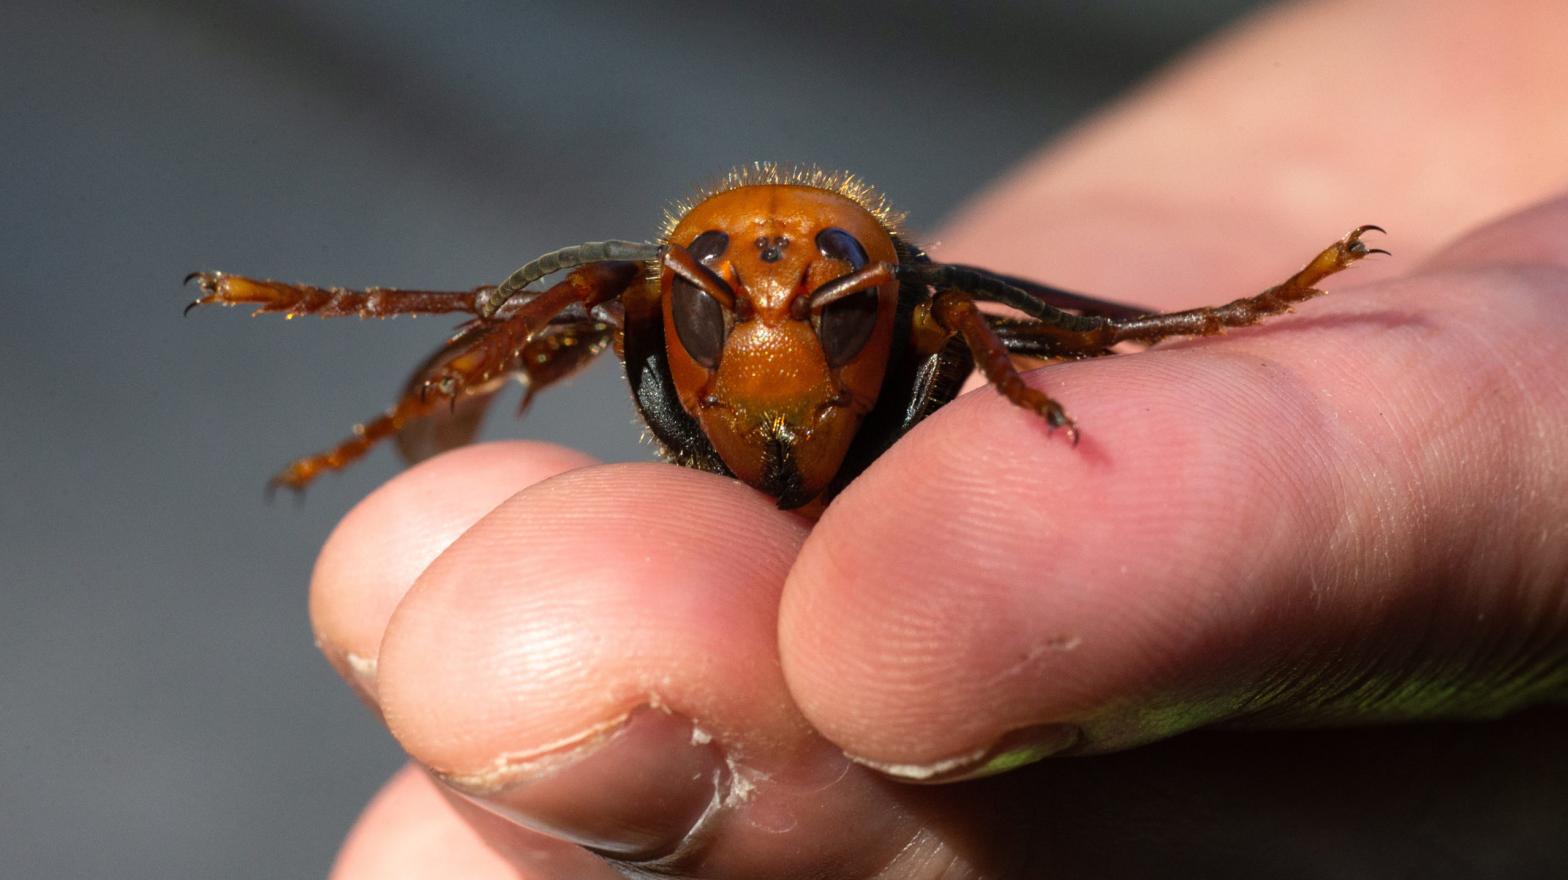 A sample specimen of a dead Asian giant hornet from Japan, also known as a murder hornet, is shown by a pest biologist from the Washington State Department of Agriculture on July 29, 2020 in Bellingham, Washington.  (Photo:  Karen Ducey , Getty Images)